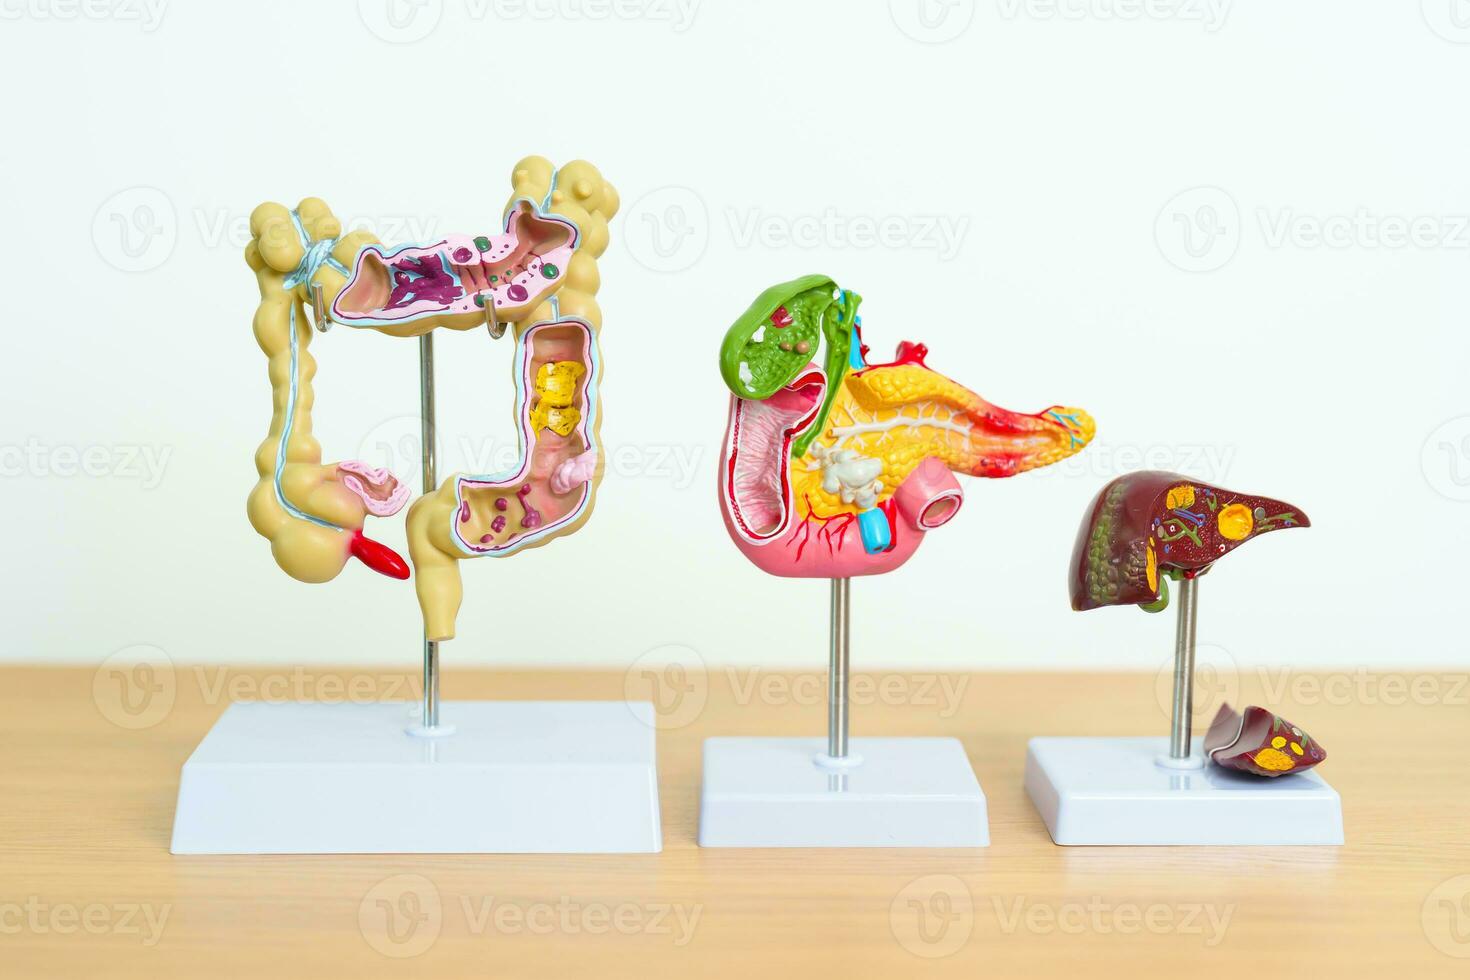 human Digestive system anatomy model, Pancreas, Gallbladder, Bile Duct, Liver and Colon Large Intestine. Disease, healthcare and Health concept photo